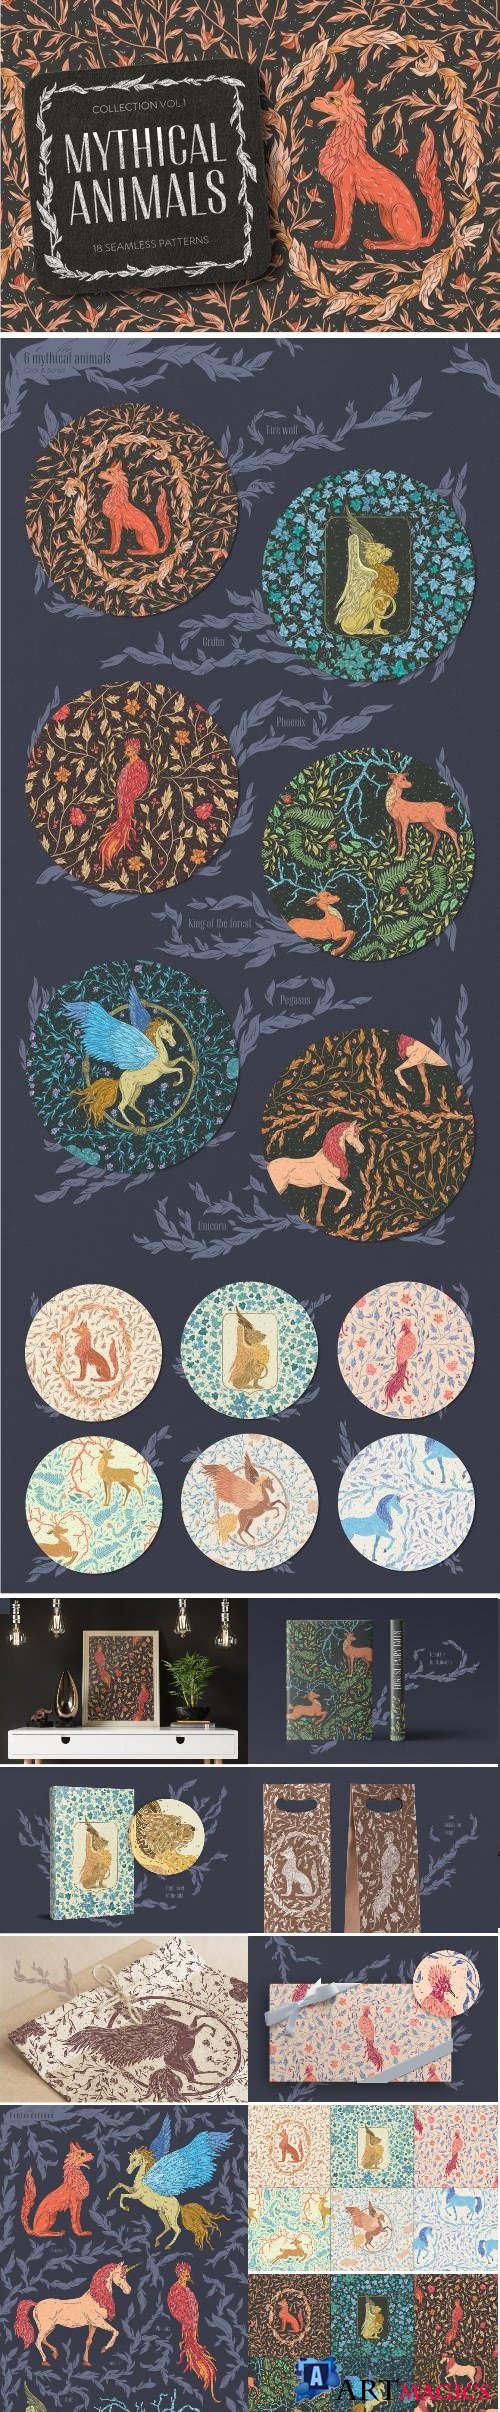 Mythical Animals patterns - 2380531